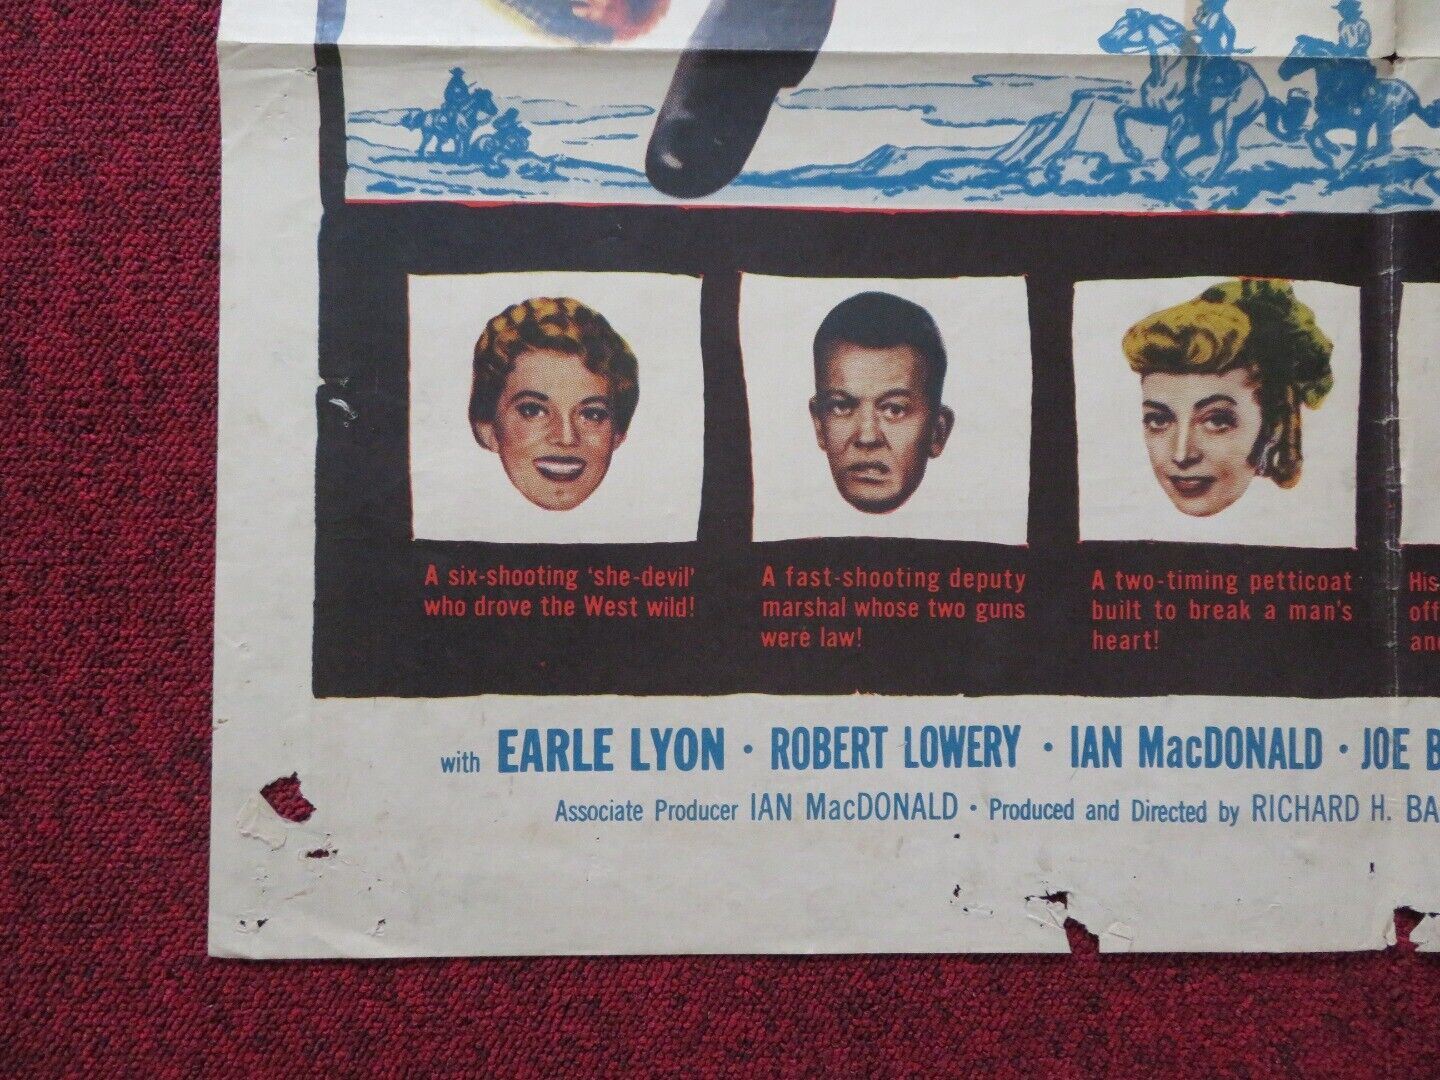 TWO-GUN LADY FOLDED US ONE SHEET POSTER PEGGY CASTLE WILLIAM TALMAN 1955